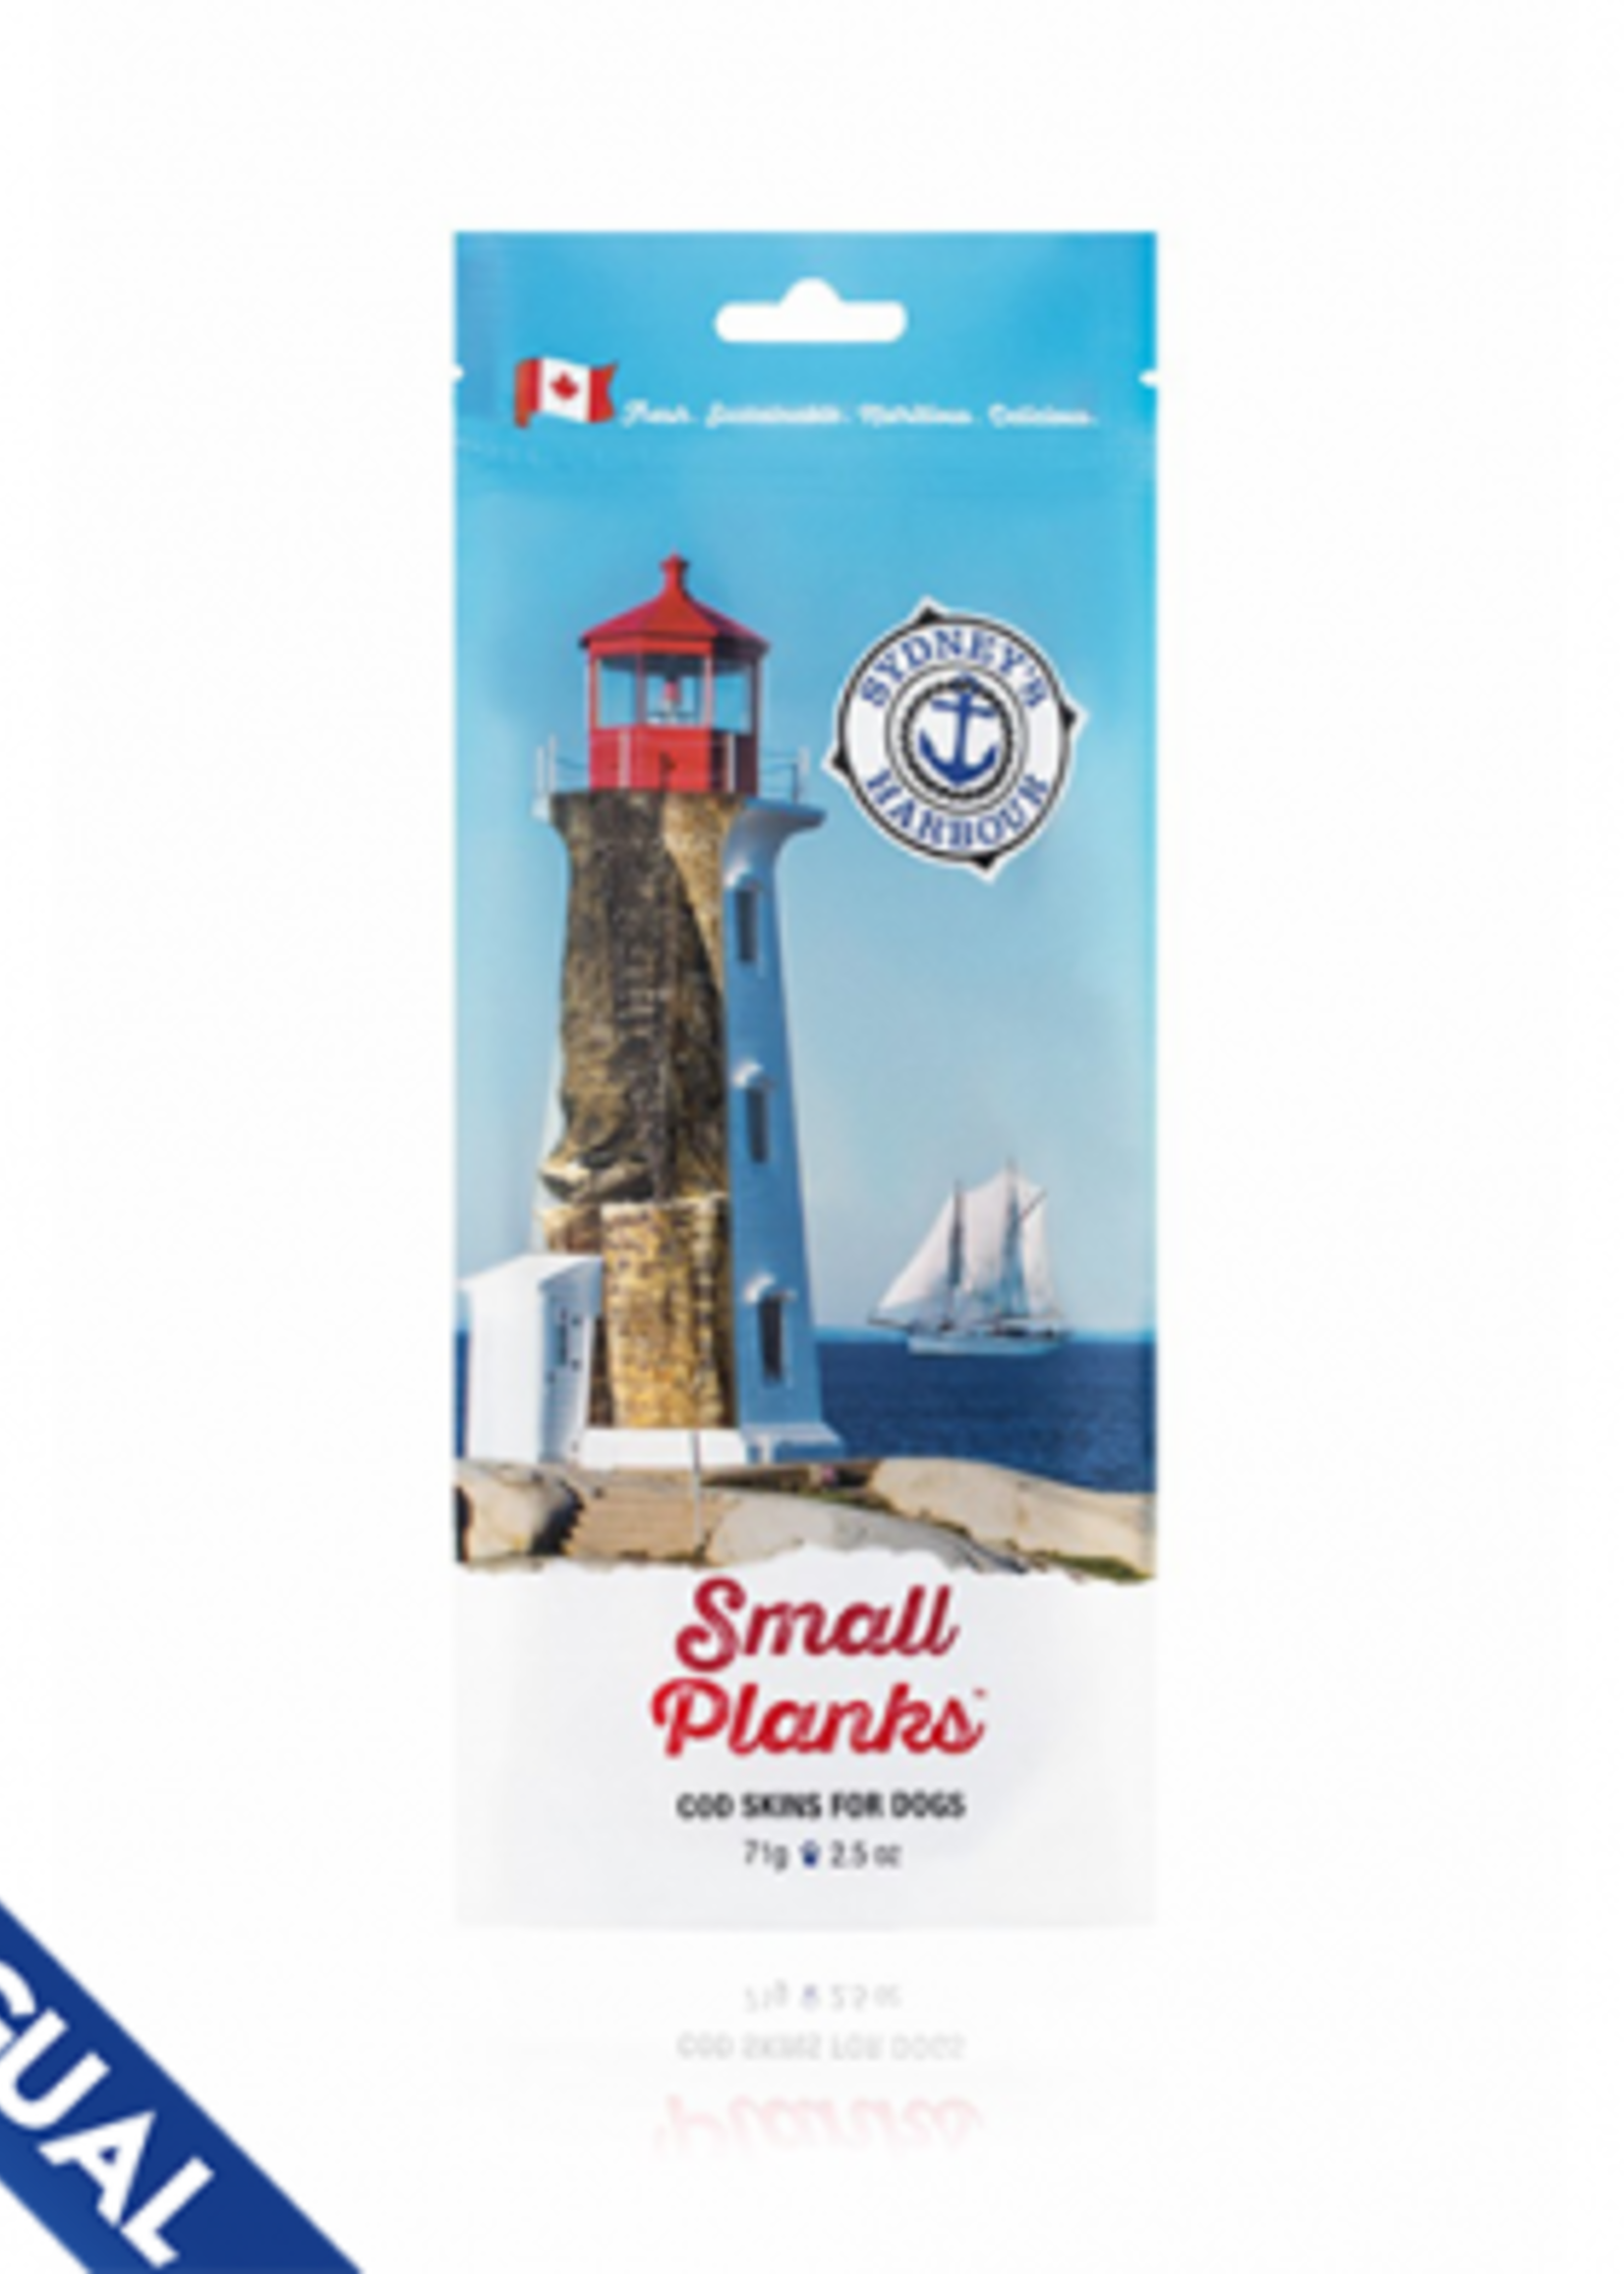 This&that® This&That Sydney's Harbor Small Planks 2.5oz